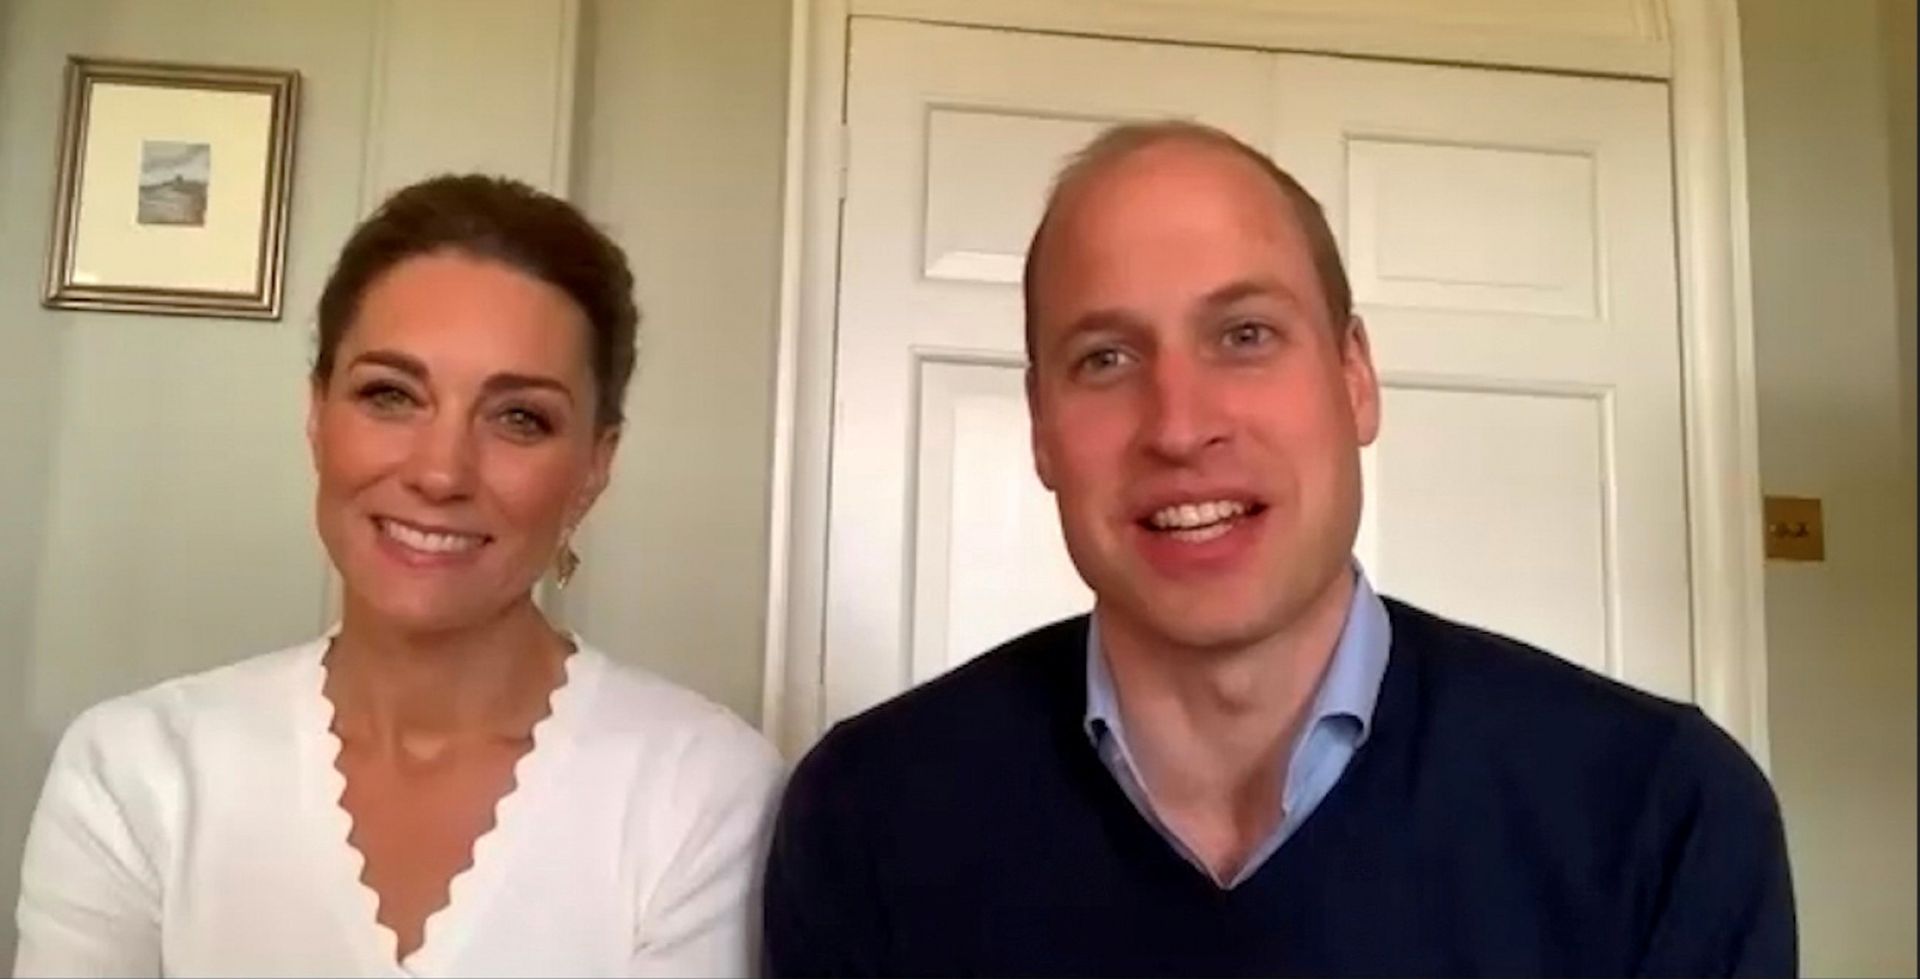 Britain's Prince William and Catherine, Duchess of Cambridge mark the first anniversary of the UK's first 24/7 crisis text line service Shout Britain's Prince William and Catherine, Duchess of Cambridge speak during a video call with Shout Chief Executive Victoria Hornby, and organisation's crisis volunteers, about their experience of providing support to thousands of people who have texted Shout over the past twelve months, in this Kensington Palace handout screen grab dated May 13, 2020 and obtained by Reuters on May 15, 2020. Kensington Palace/Handout via REUTERS THIS IMAGE HAS BEEN SUPPLIED BY A THIRD PARTY. NO RESALES. NO ARCHIVES. MUST ON SCREEN COURTESY KENSINGTON PALACE. KENSINGTON PALACE